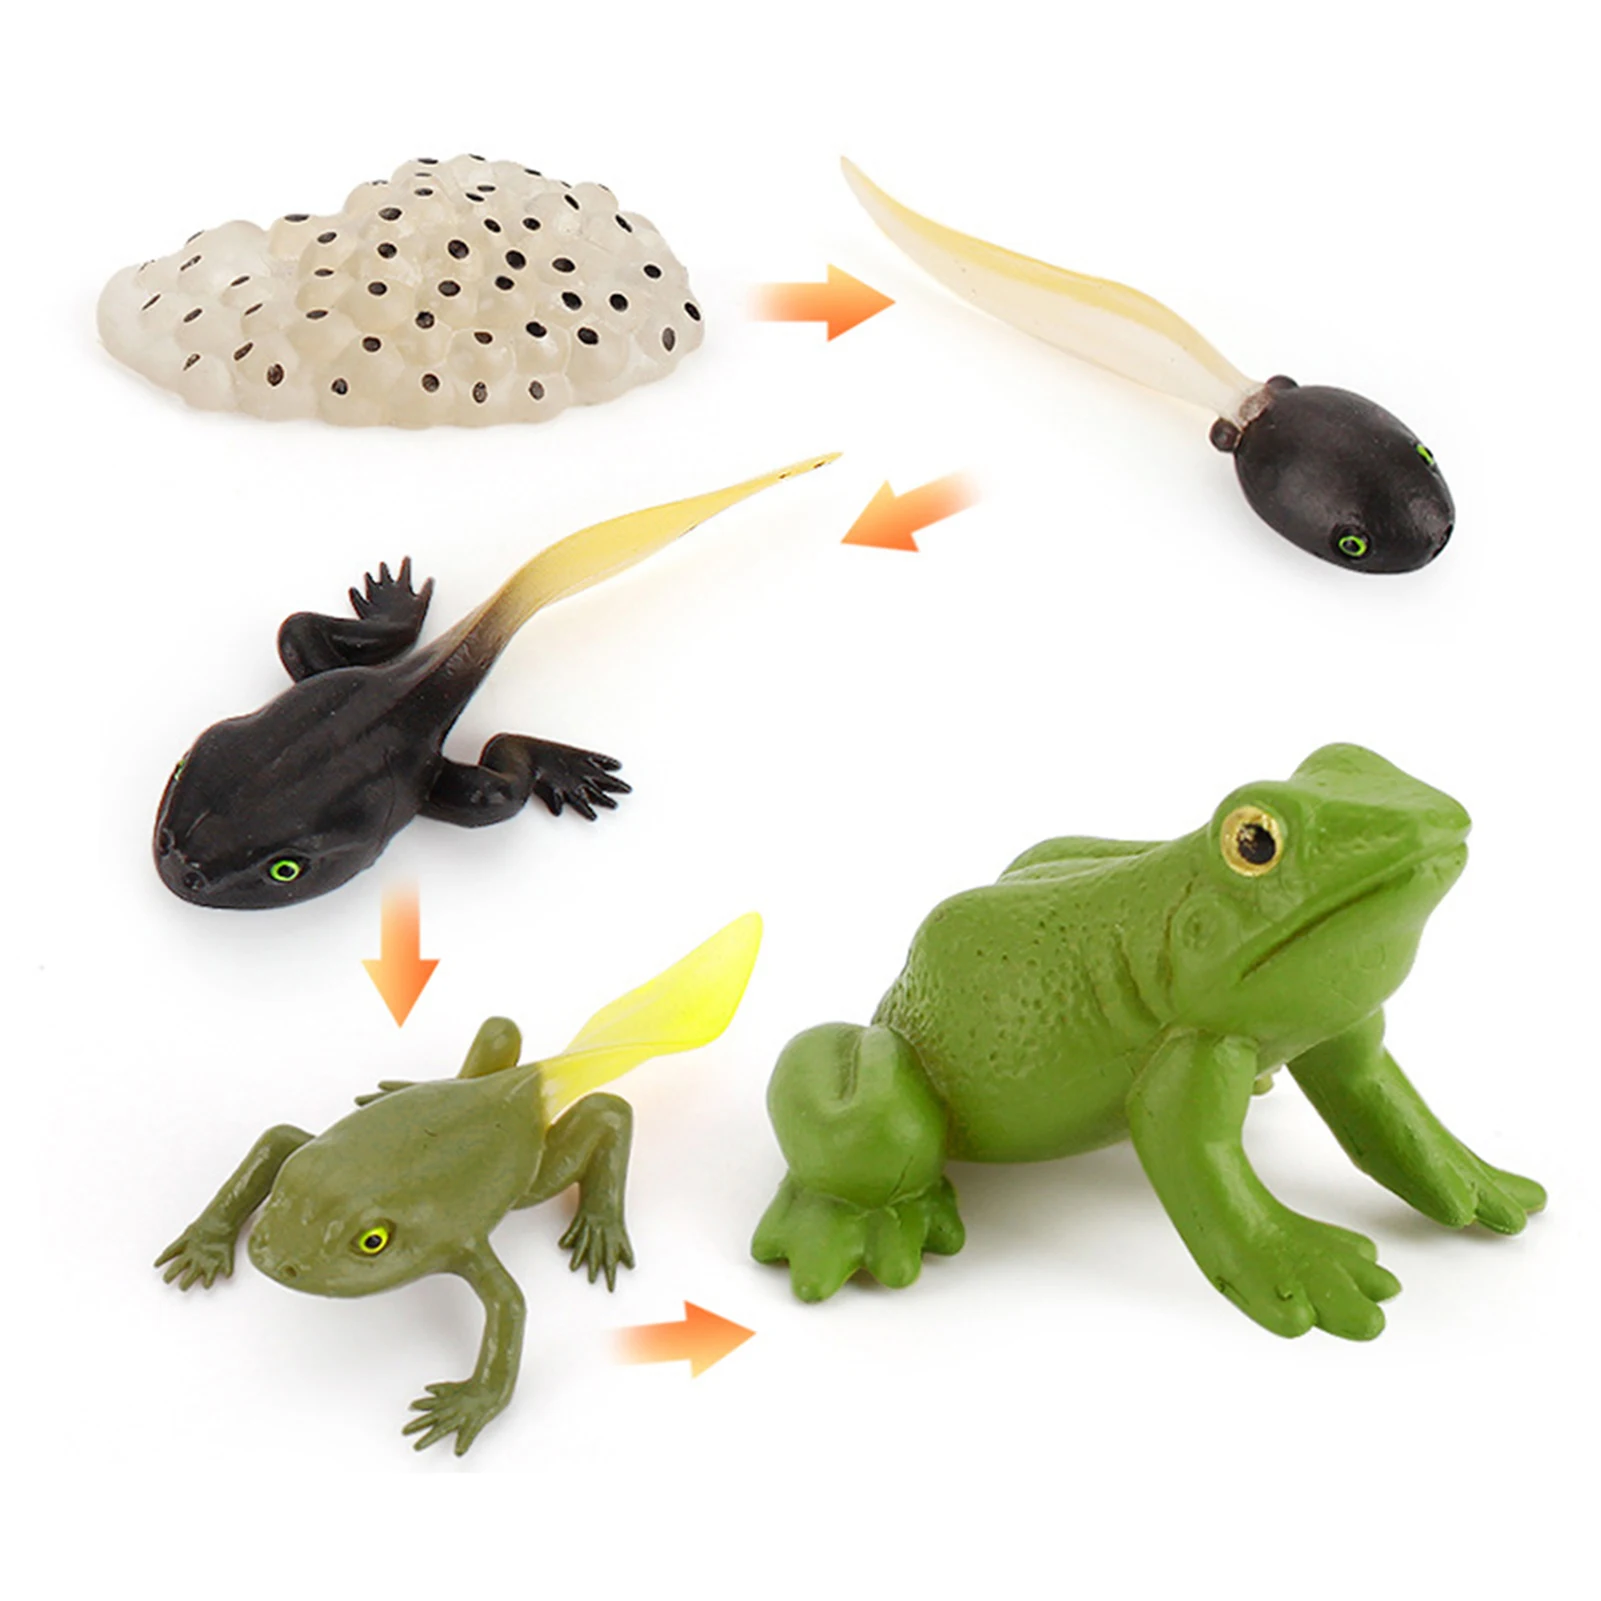 

Simulation Animal Toys Solid Turtle Chick Frog Growth Teaching Aid Hand-Made Toy Construction Sets Educational Science Games B99